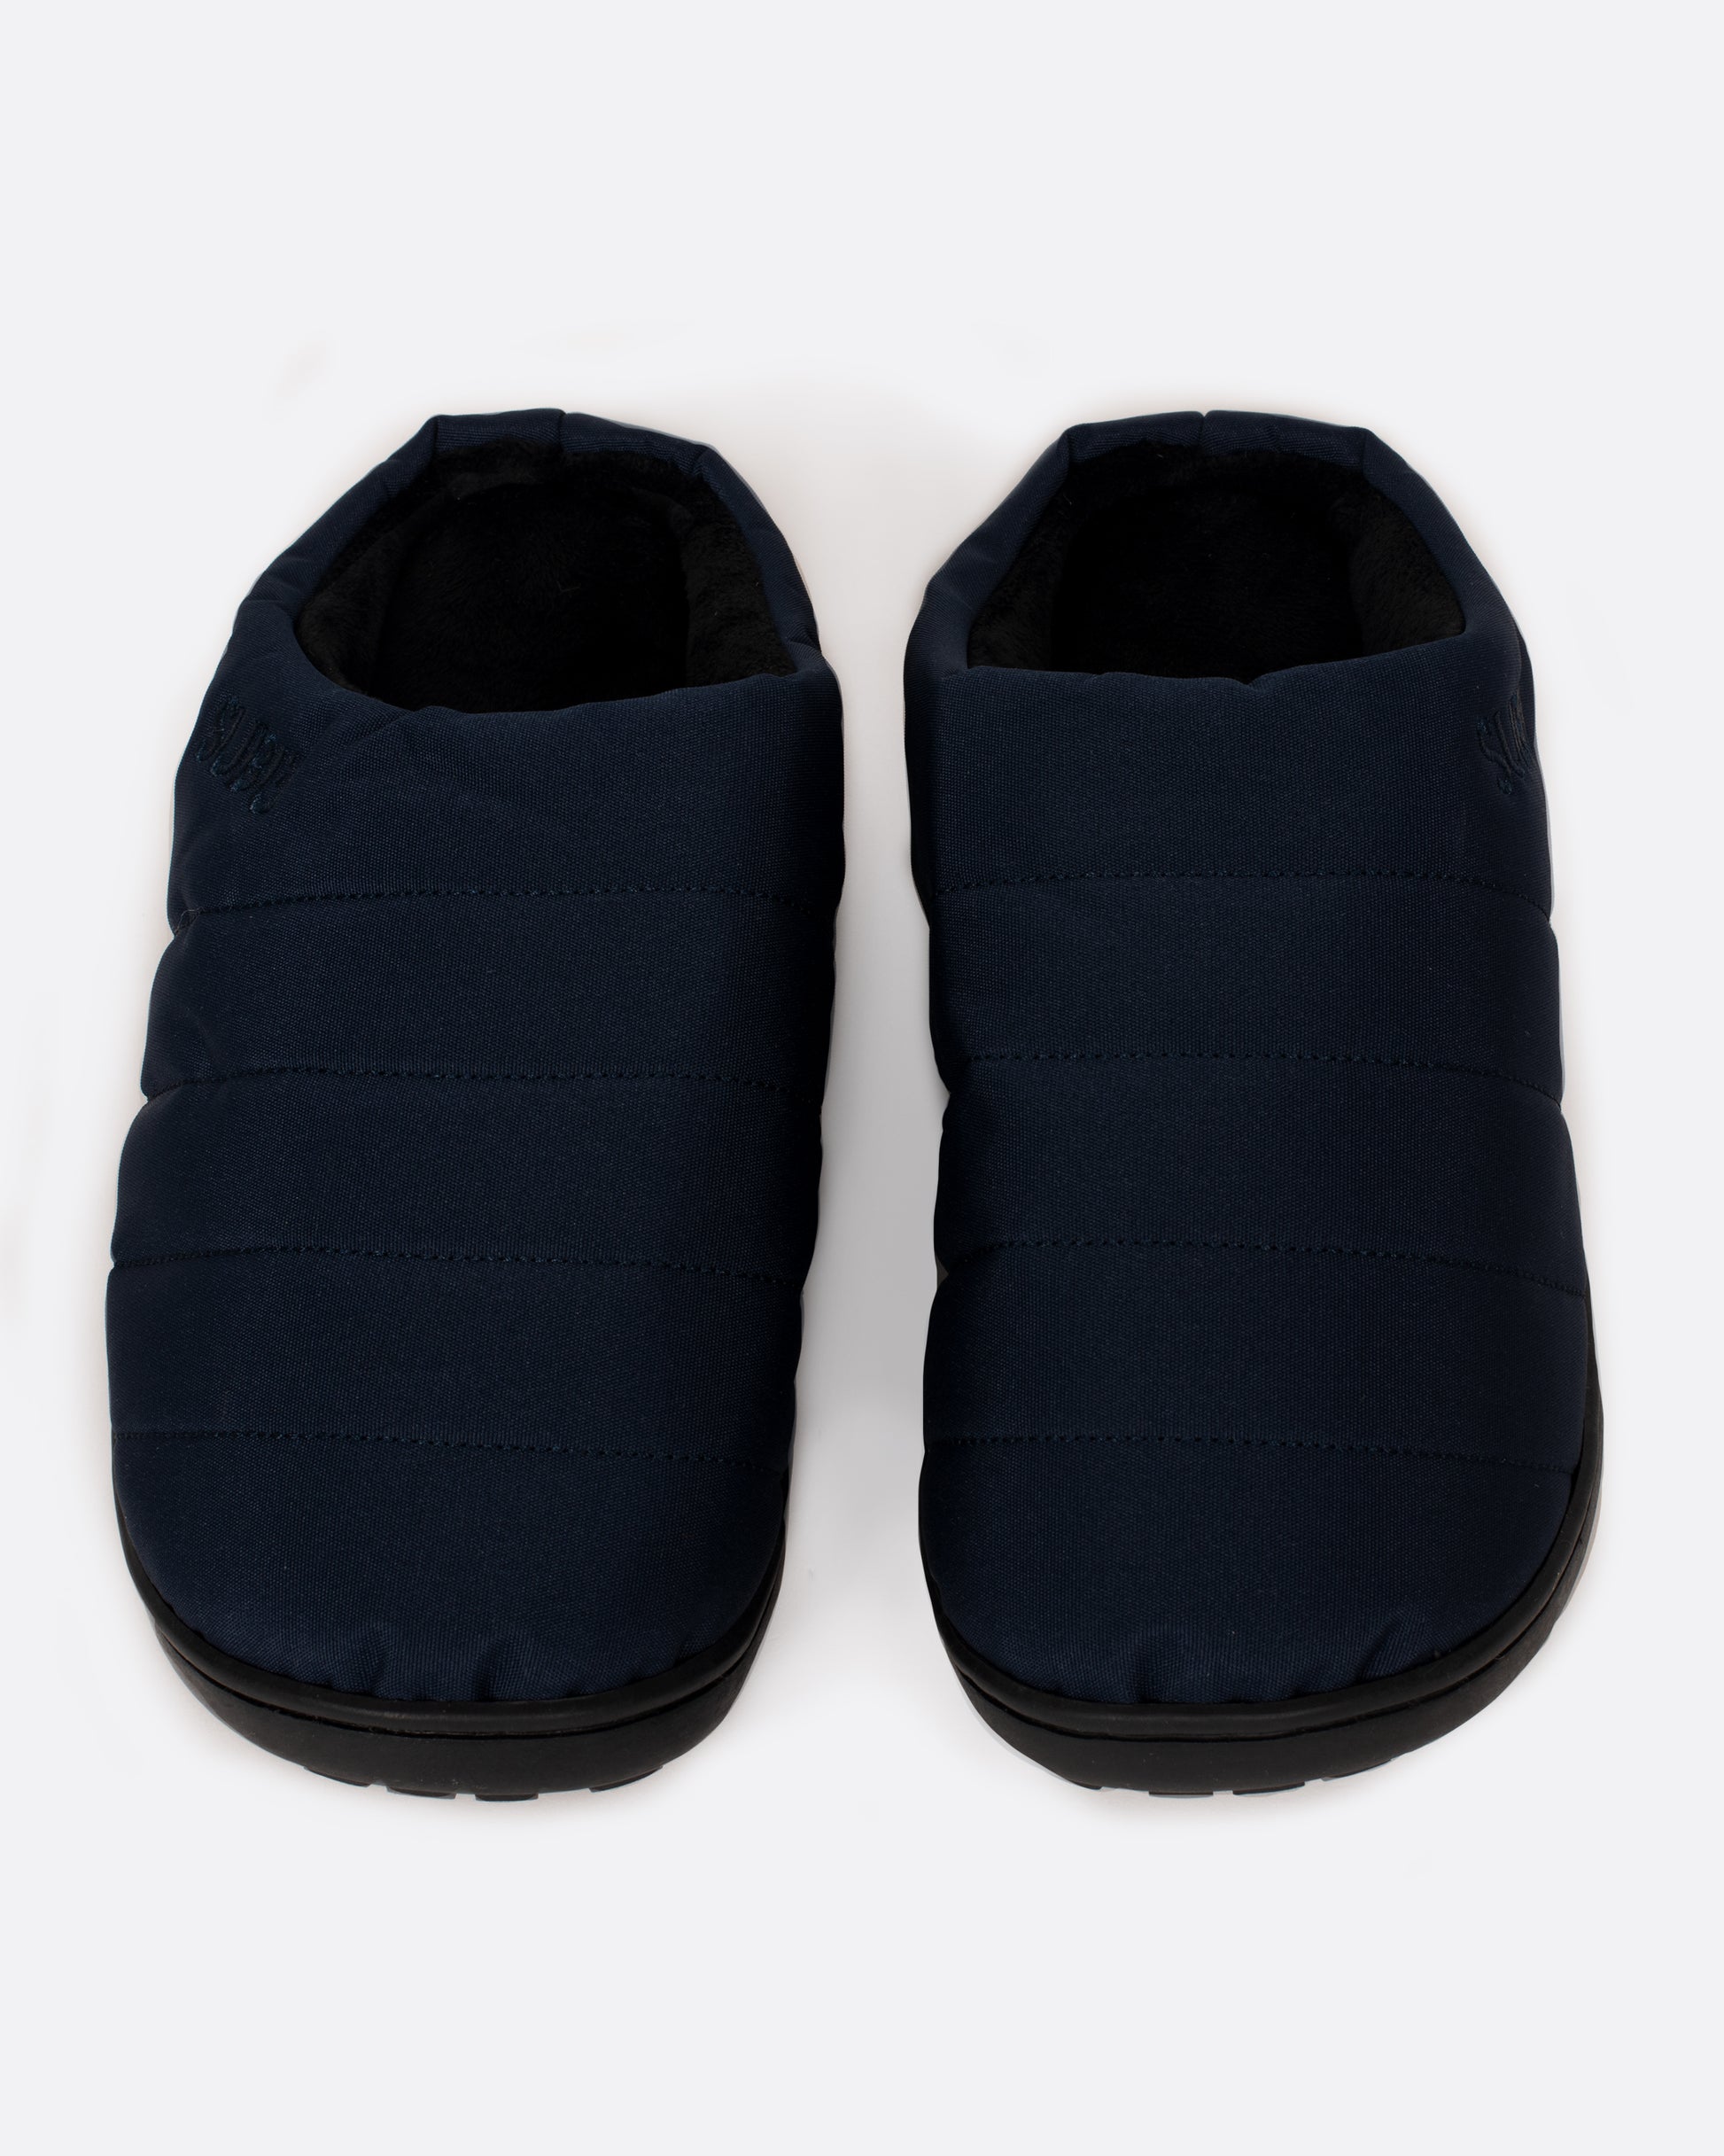 A pair of navy nylon slippers with black rubber soles, shown from the front.